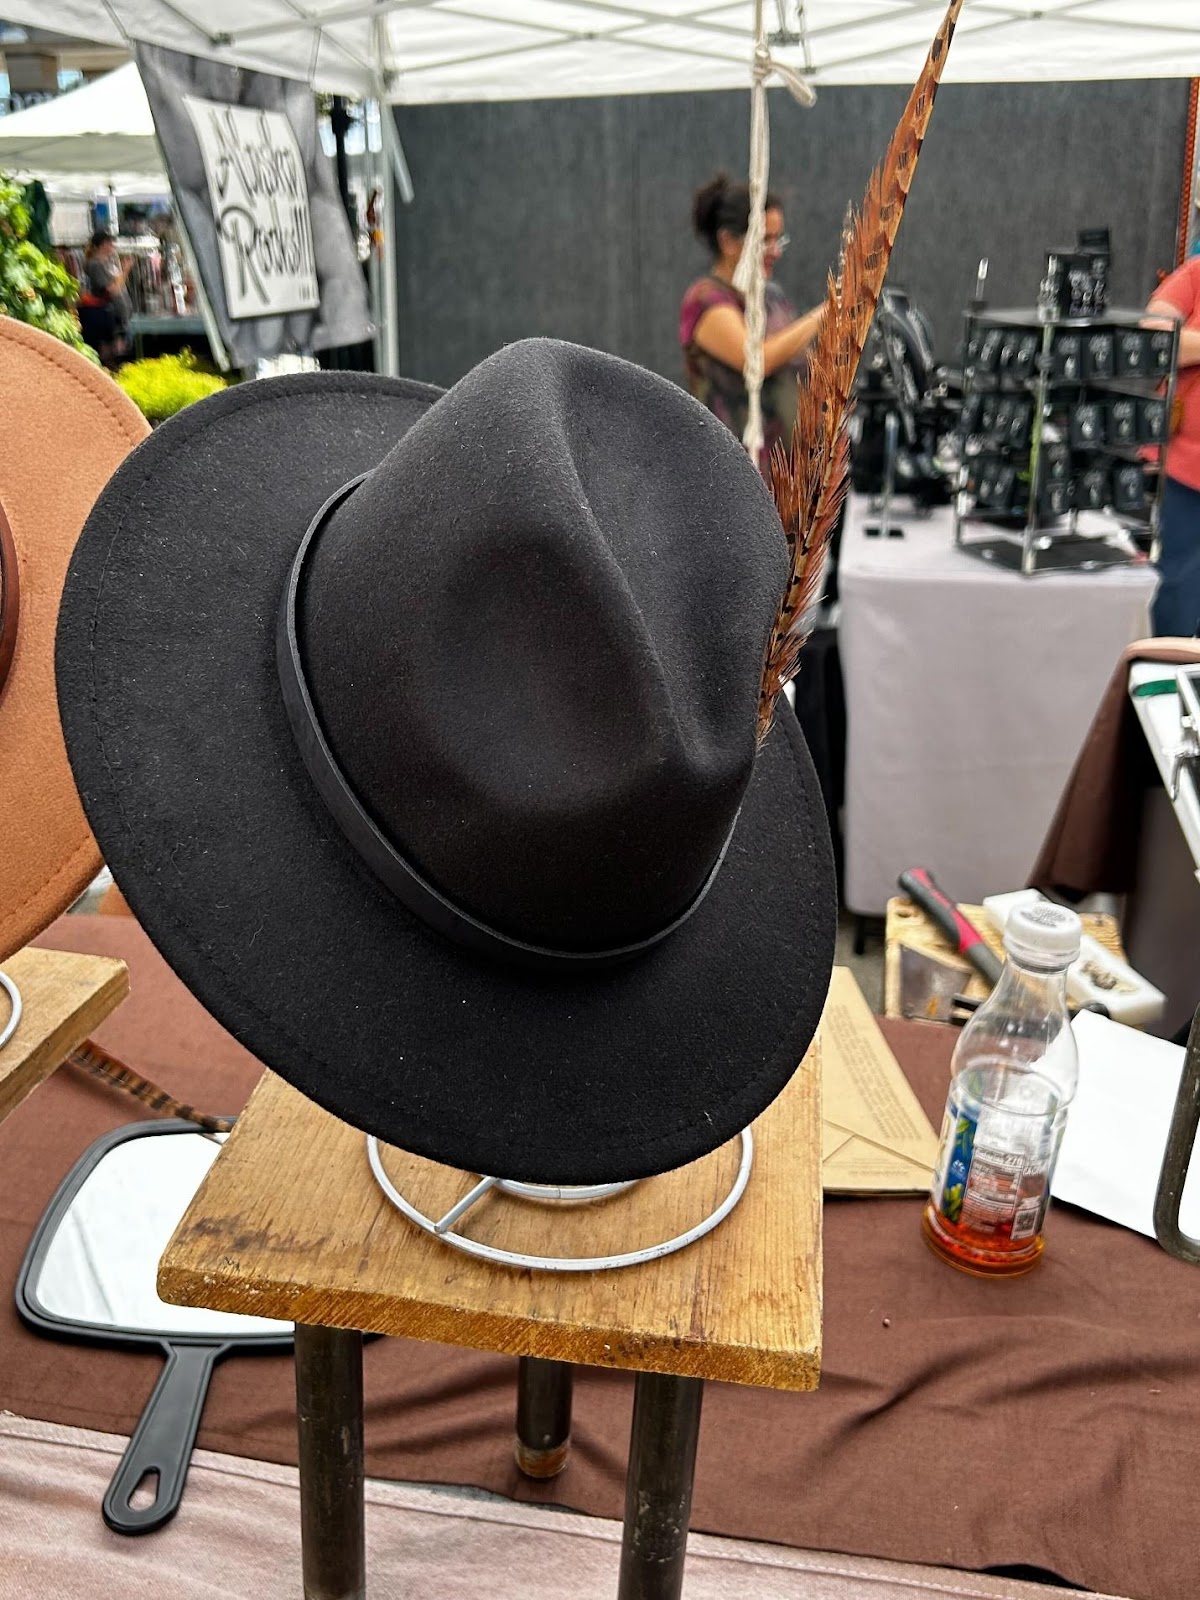 A black hat on a stand

Description automatically generated